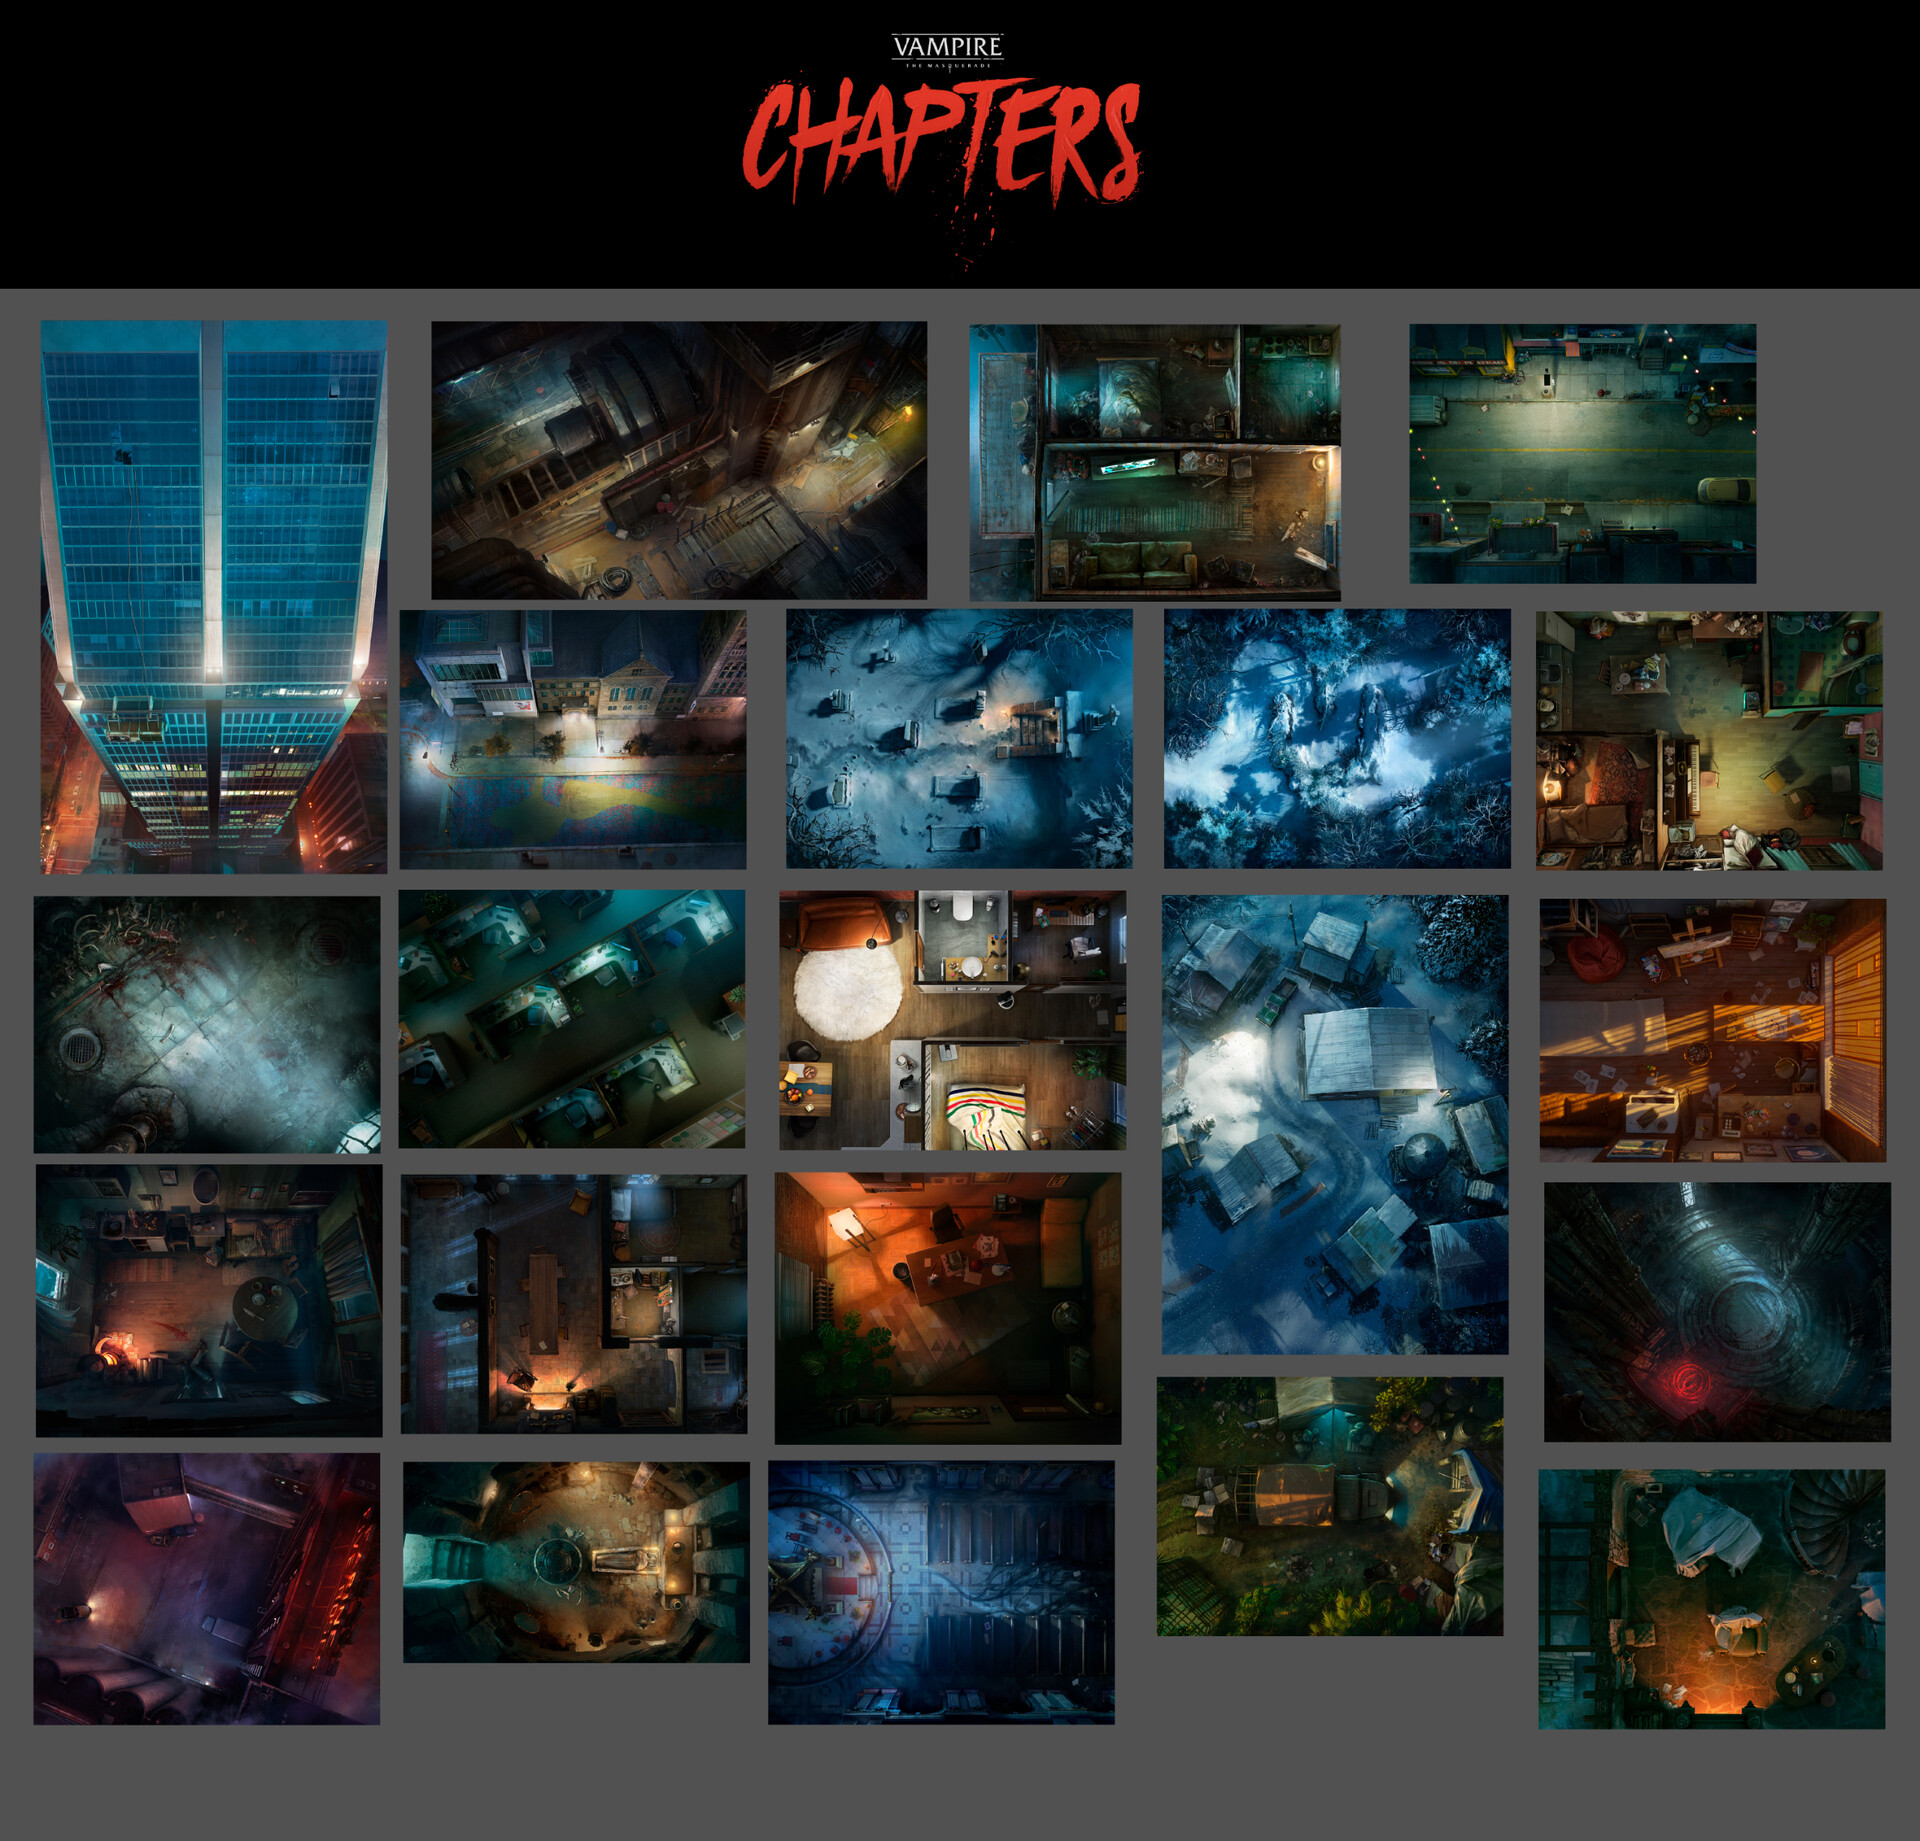 ArtStation - Map for Vampire the Masquerade-Chapters, Sergey Vasnev